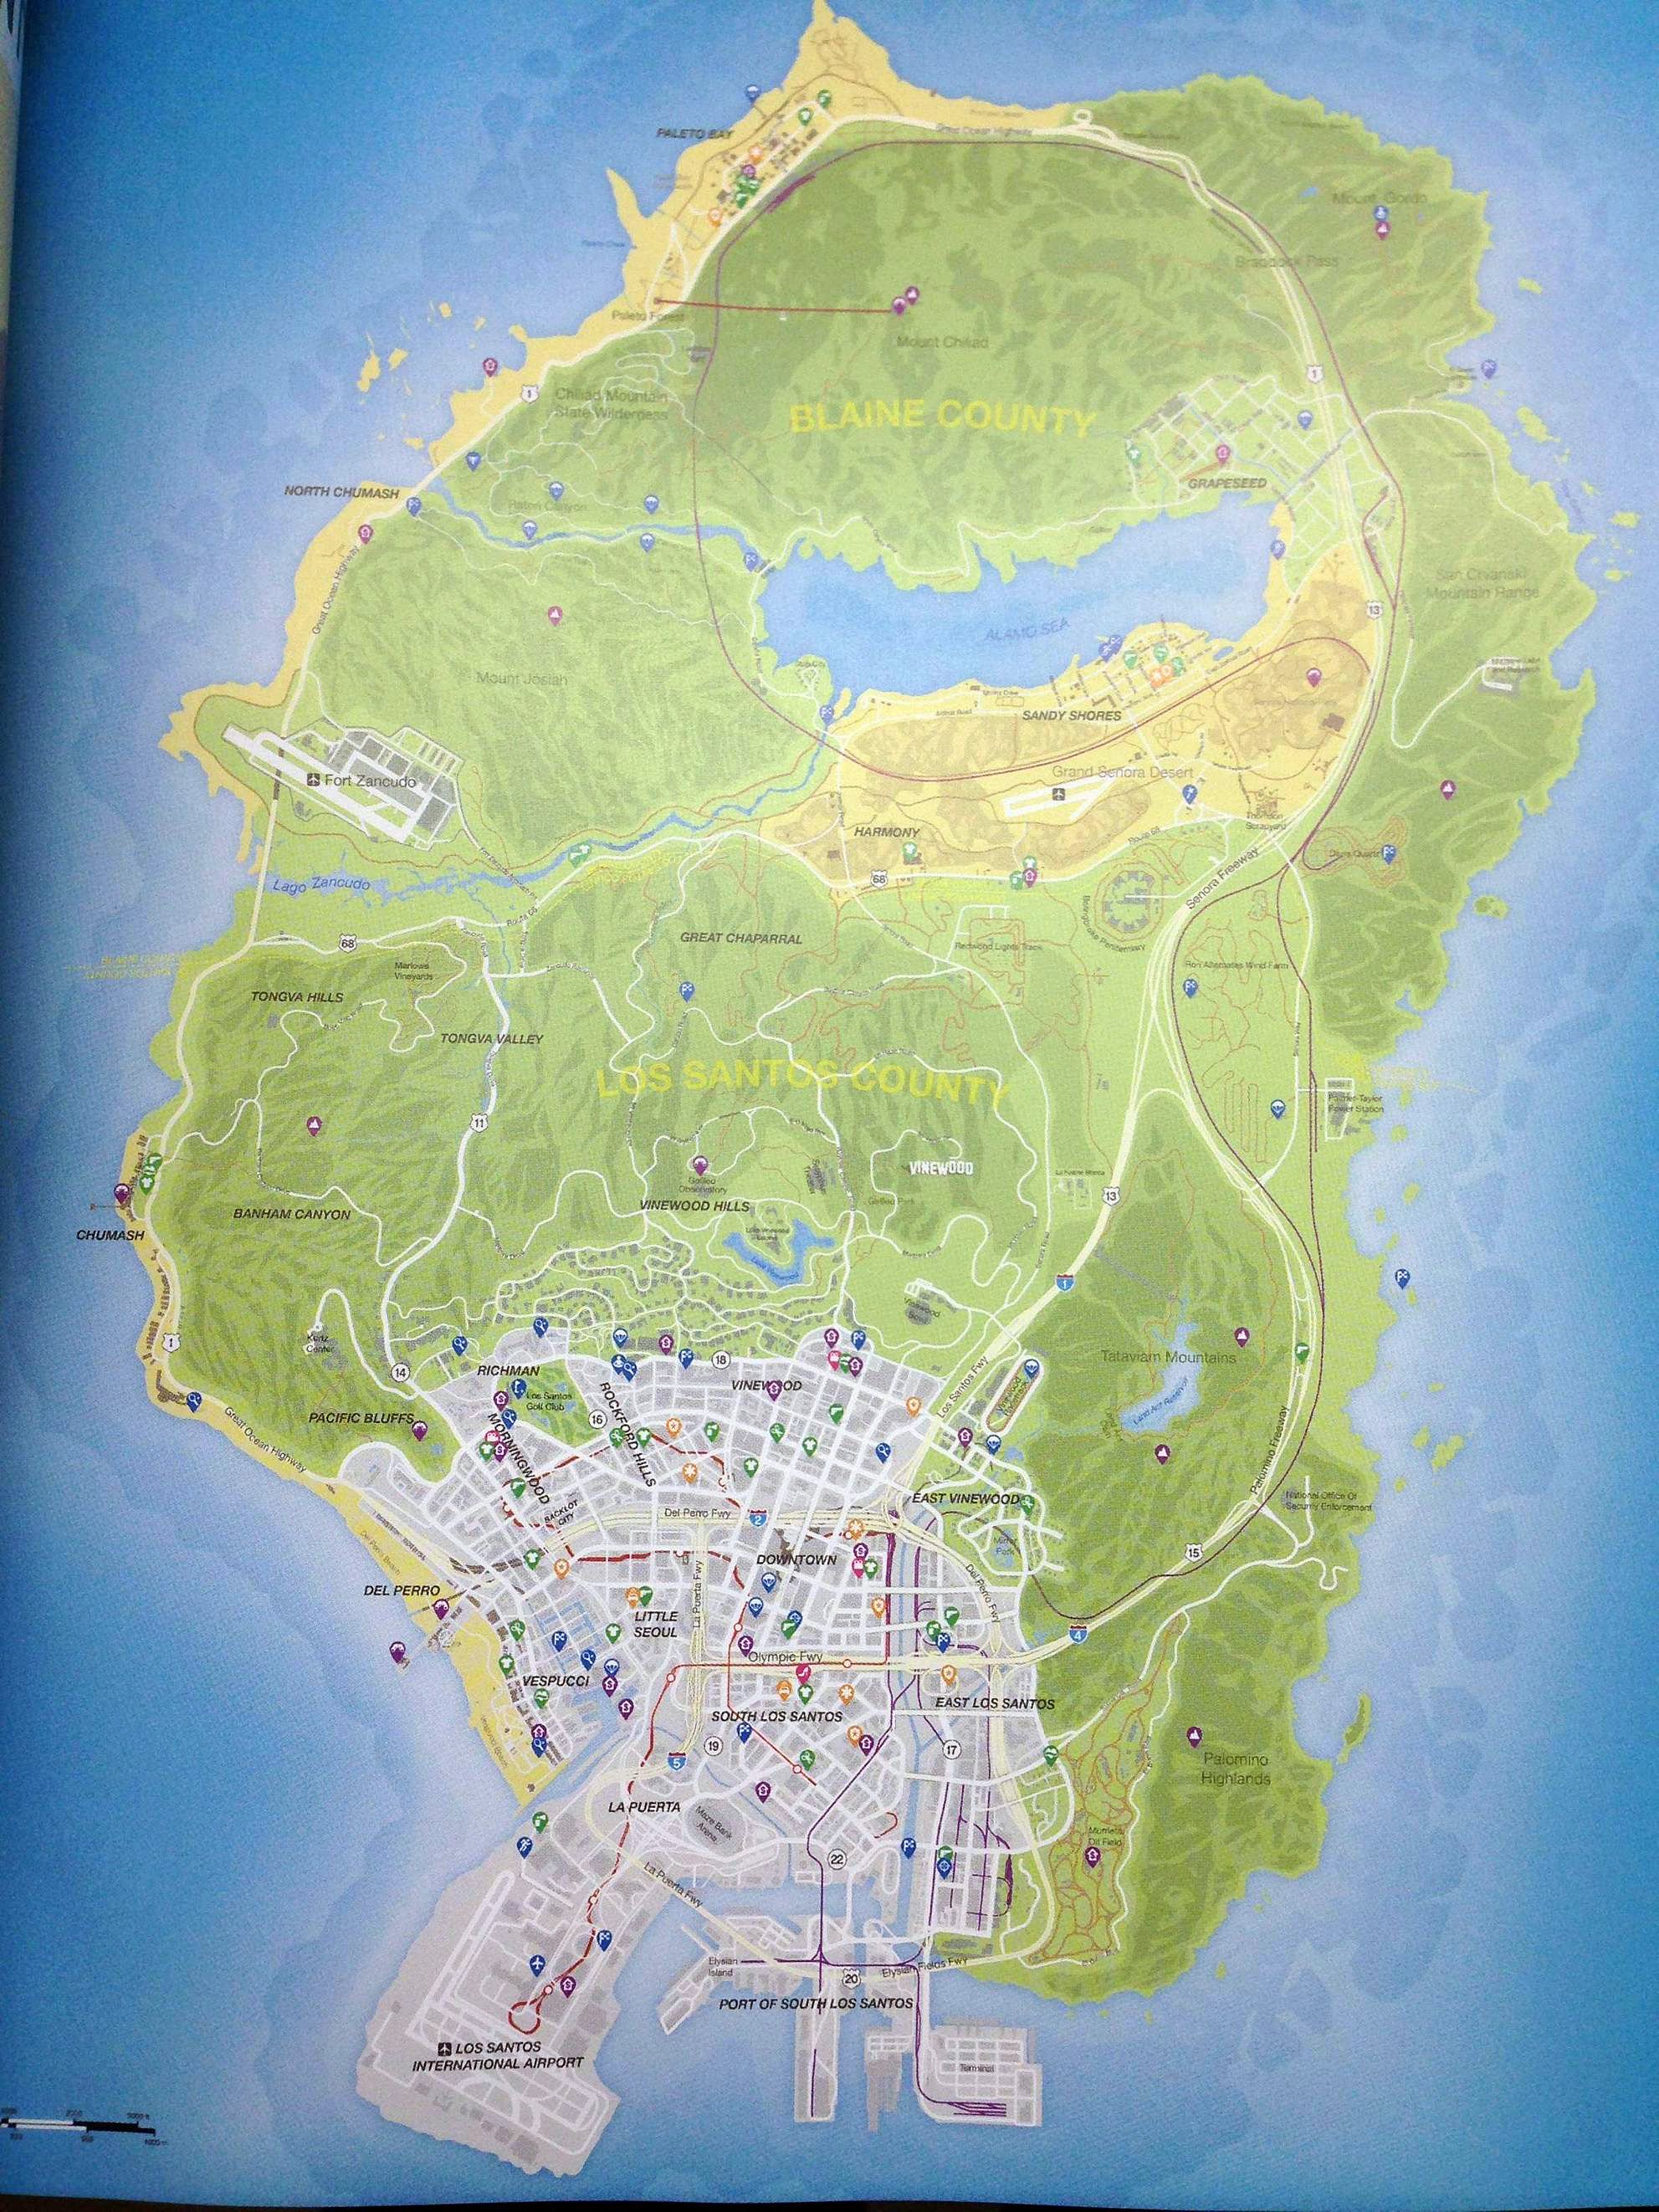 This is likely the GTA 5 map. Click for a larger version.